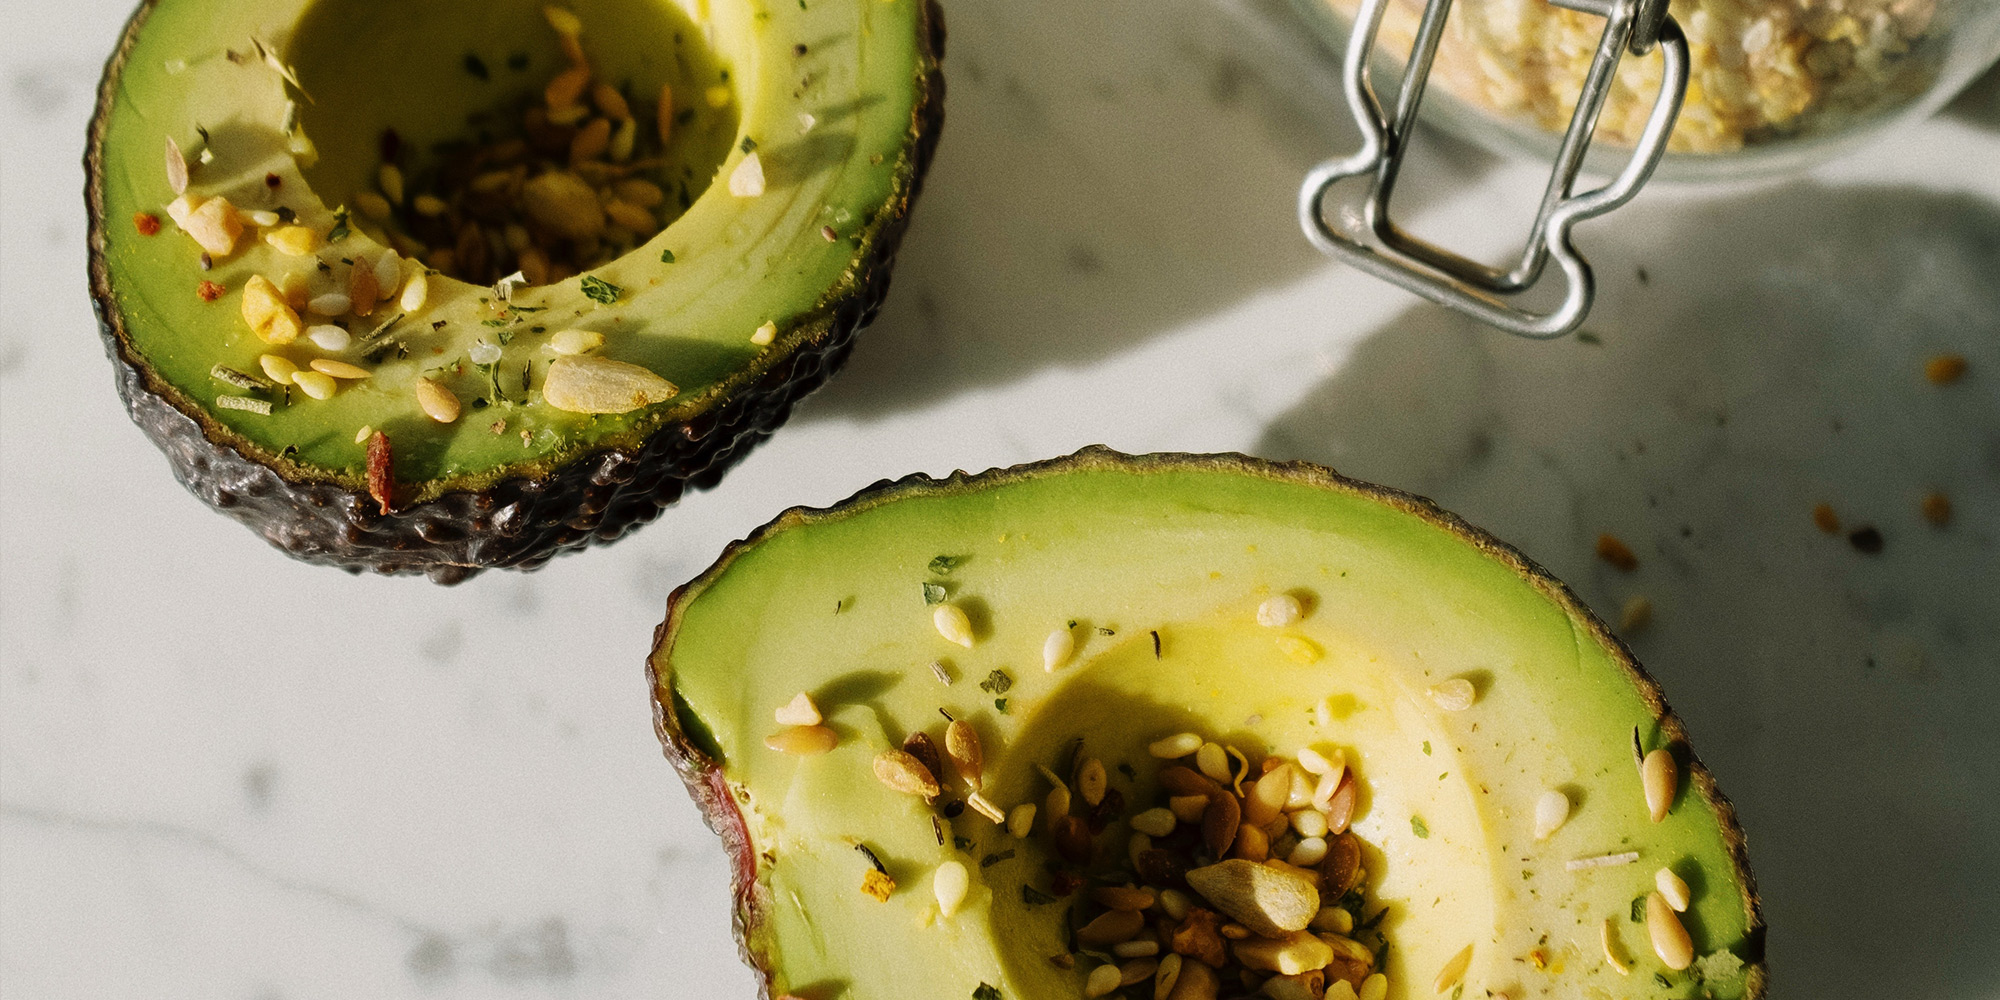 photo: avocados topped with seeds